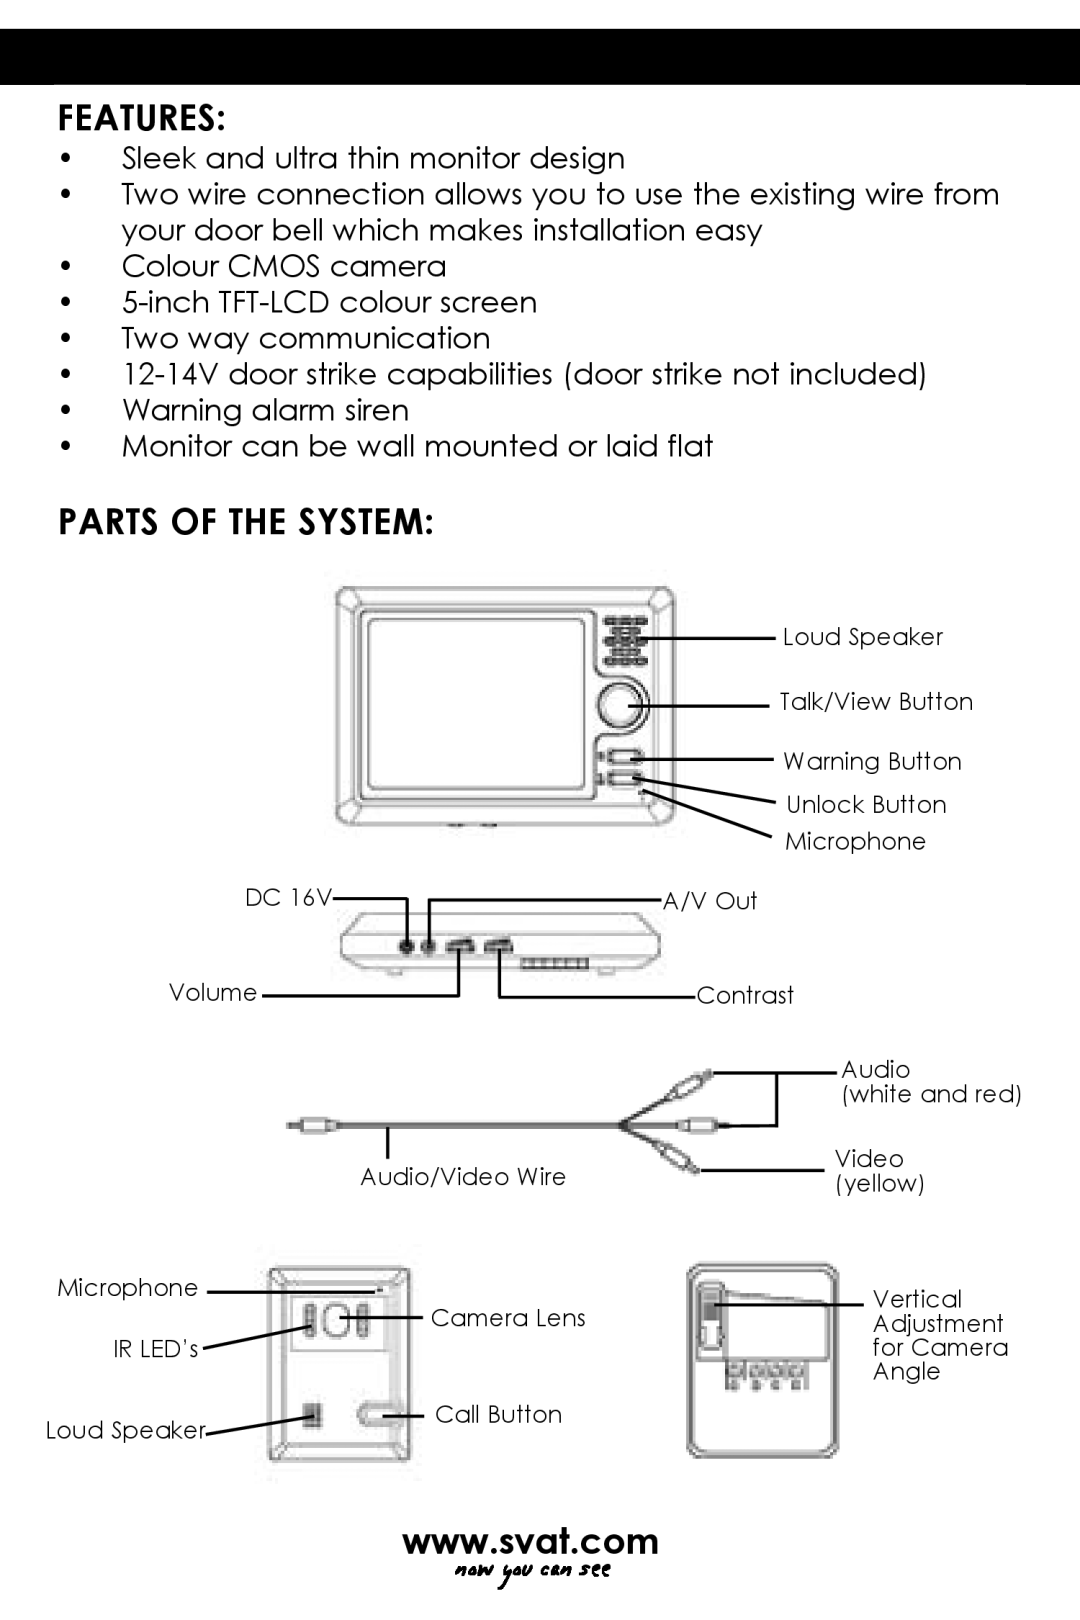 SVAT Electronics VISS7500 user manual Features, Parts Of The System 